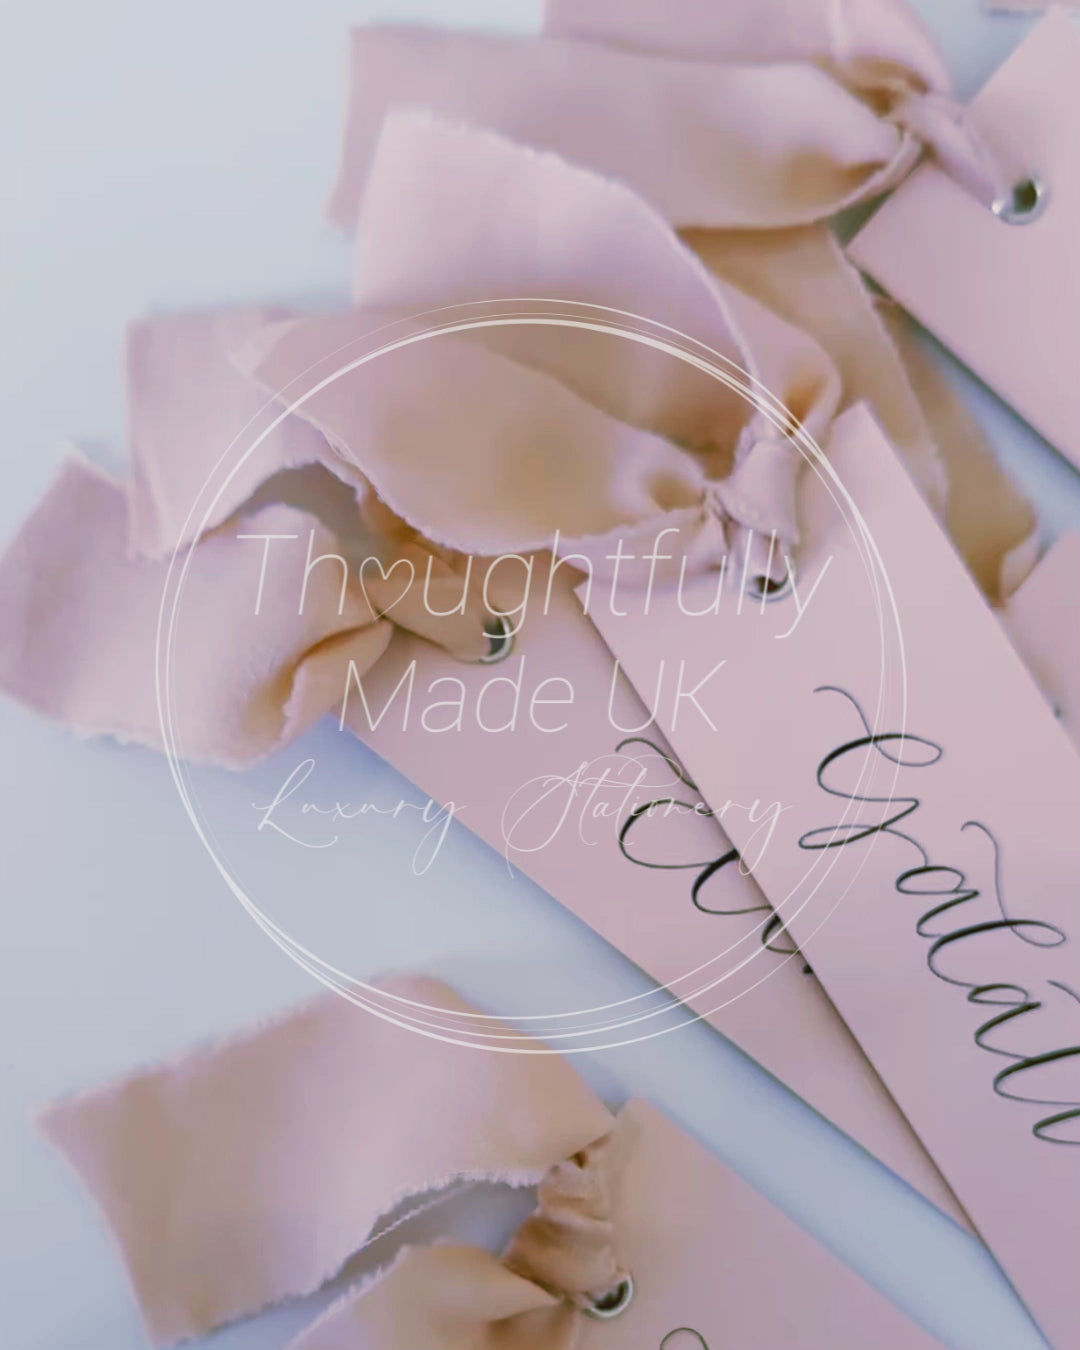 Blush Place Cards, Pink Place Cards, Calligraphy Place Cards, Wedding Place Names